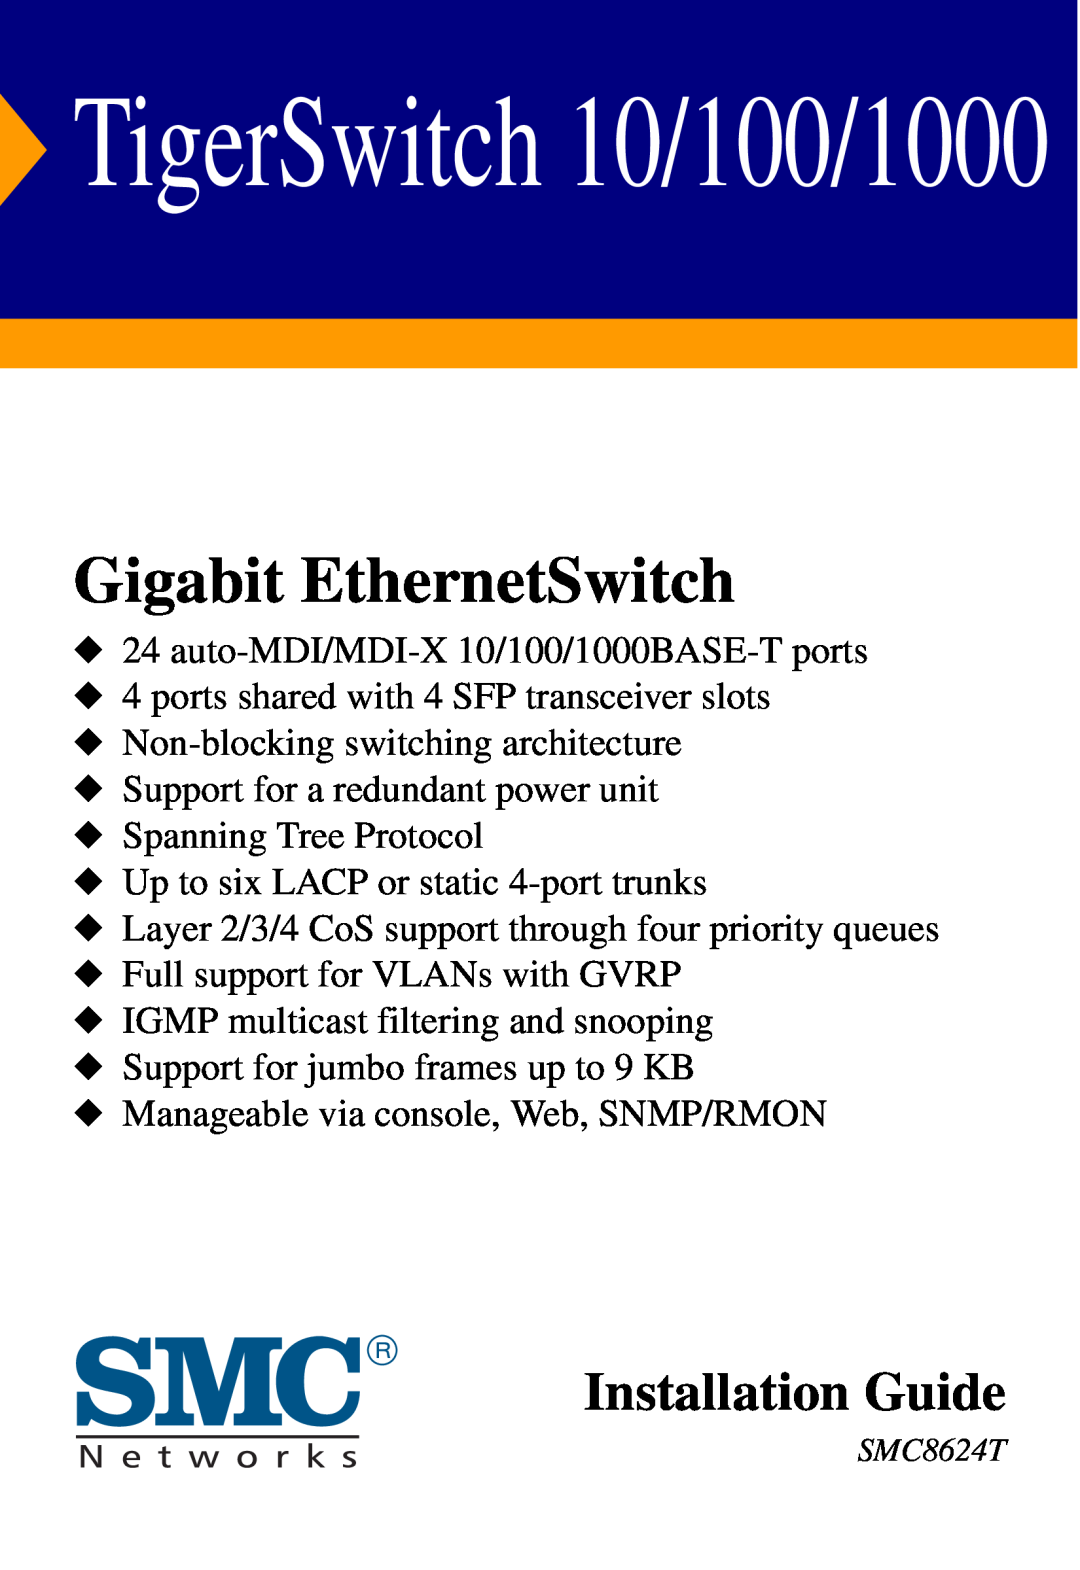 SMC Networks SMC8624T manual Gigabit Ethernet Switch, TigerSwitch 10/100/1000, Installation Guide 